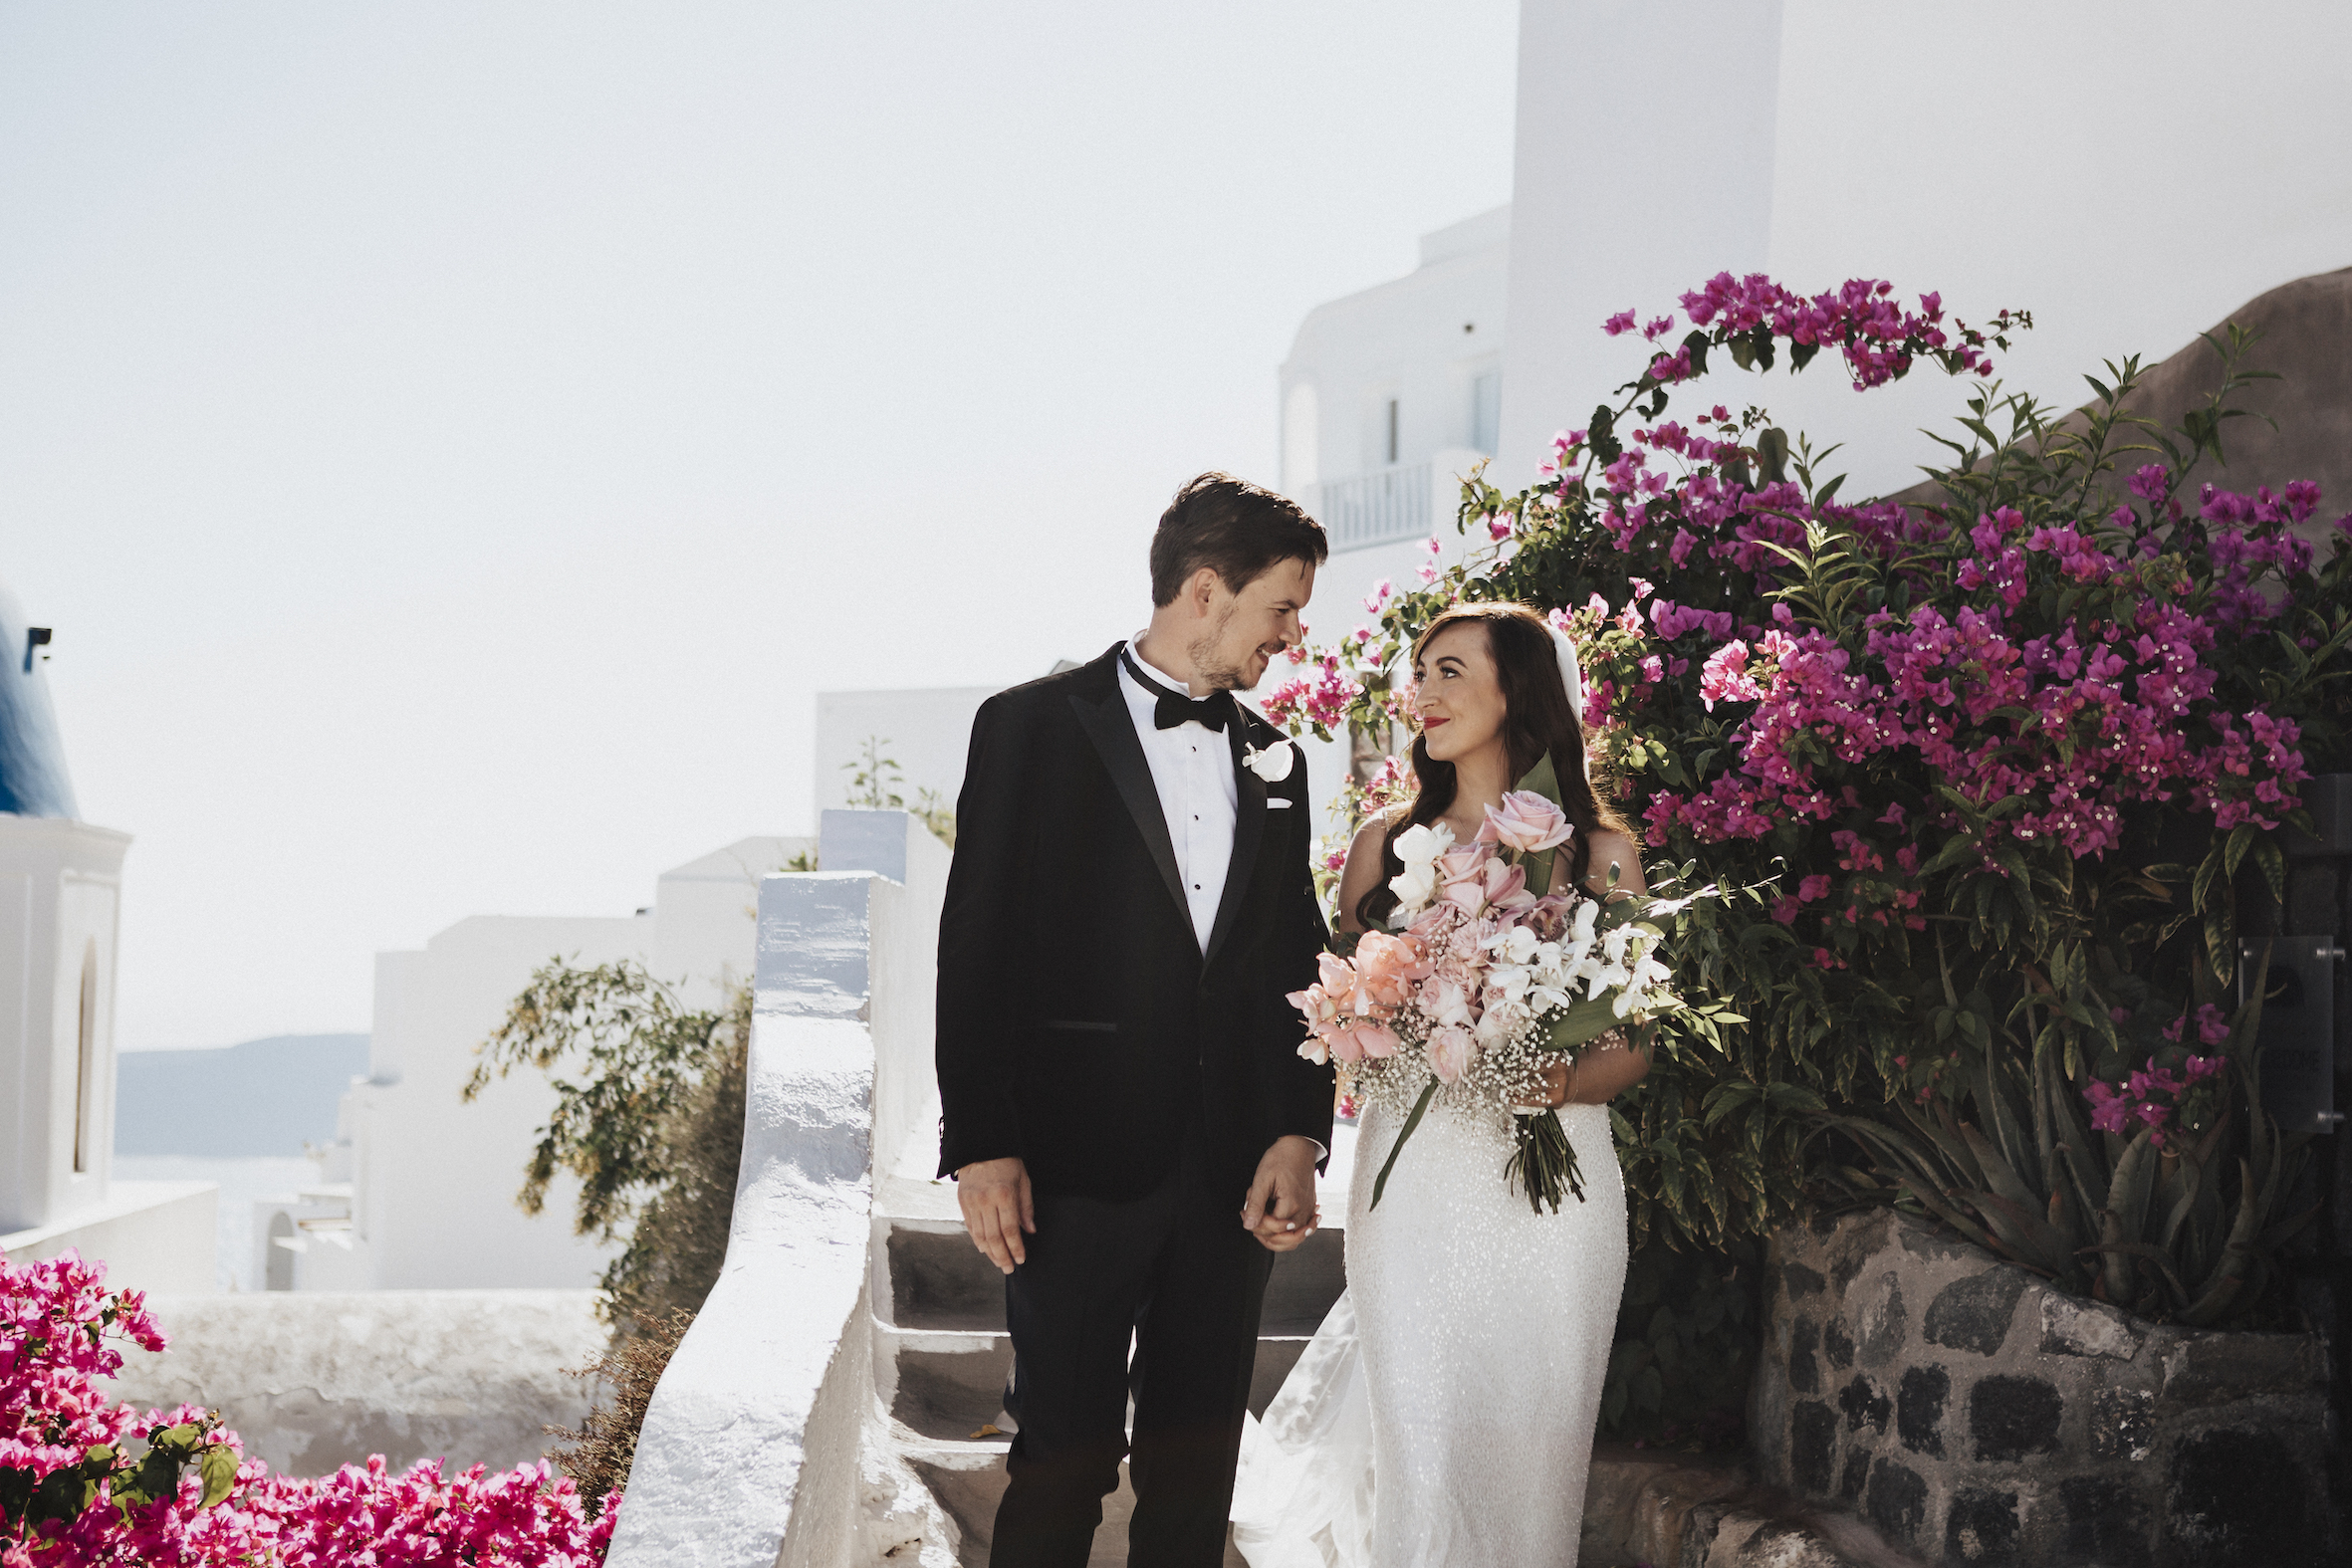 Anneliese and James walking through the streets of Santorini holding hands